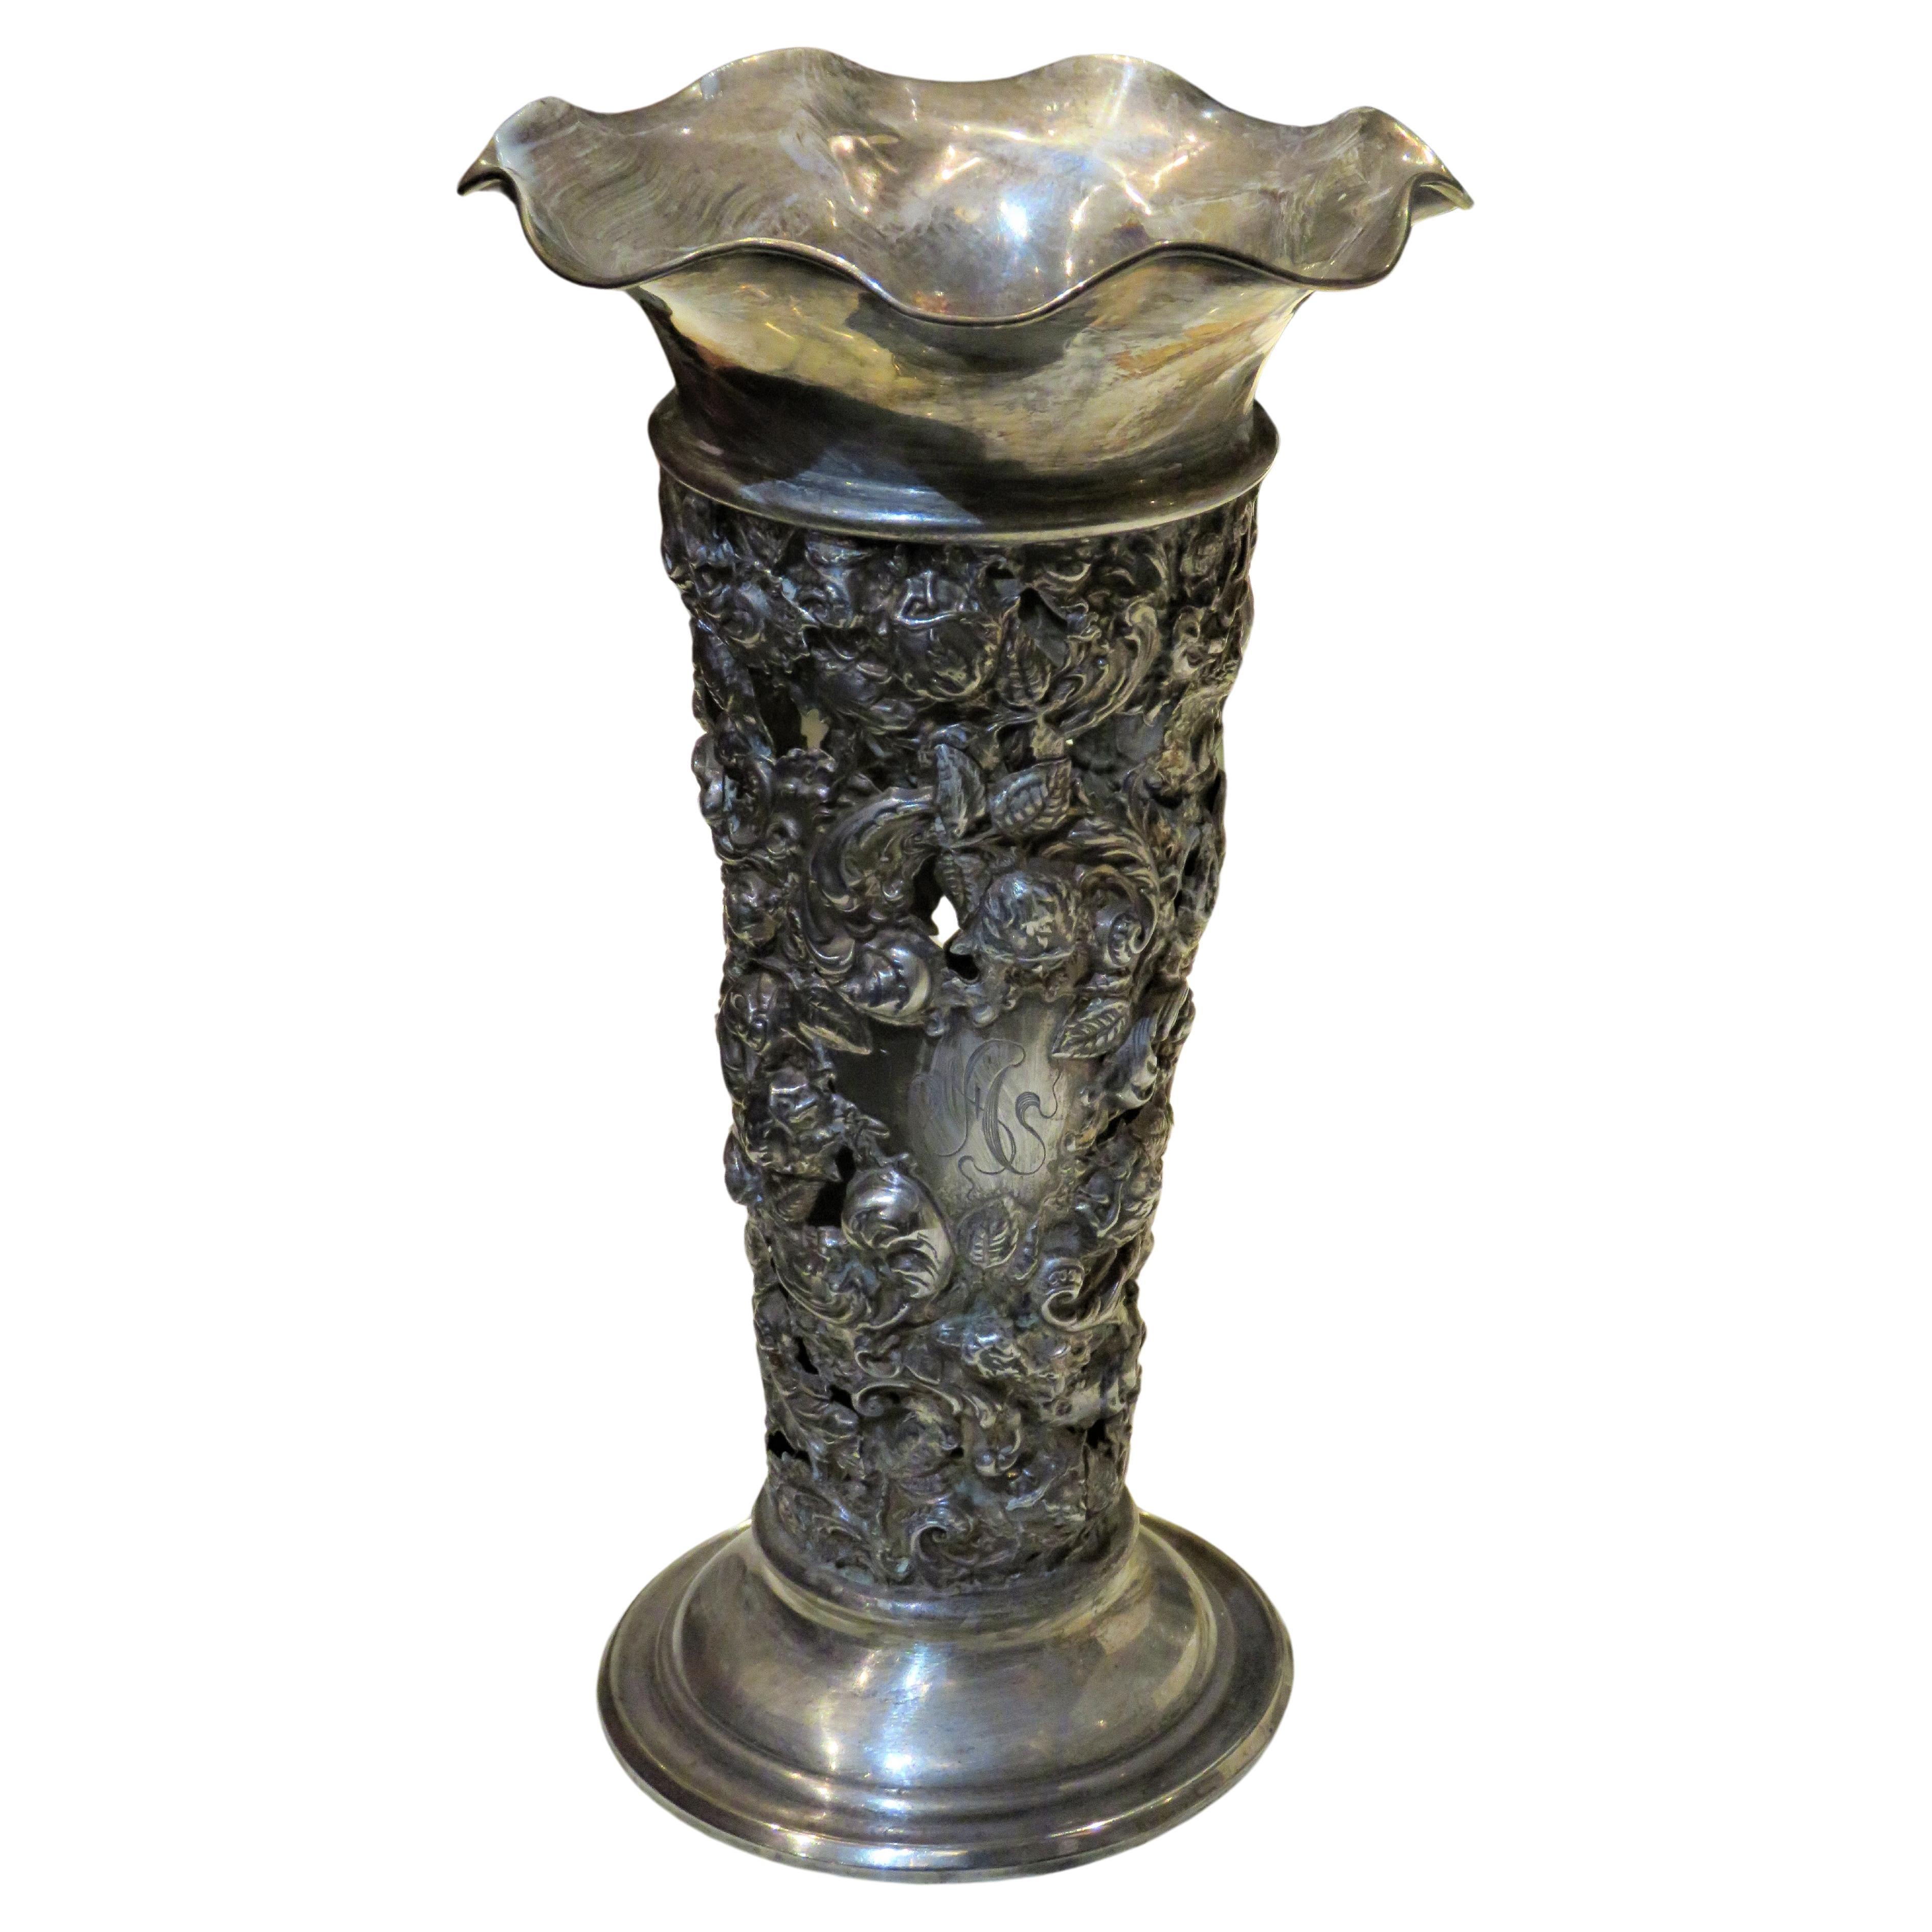 Rare Exquisite 19TH Century French Sterling Silver Heavy Relief Floral Vase For Sale